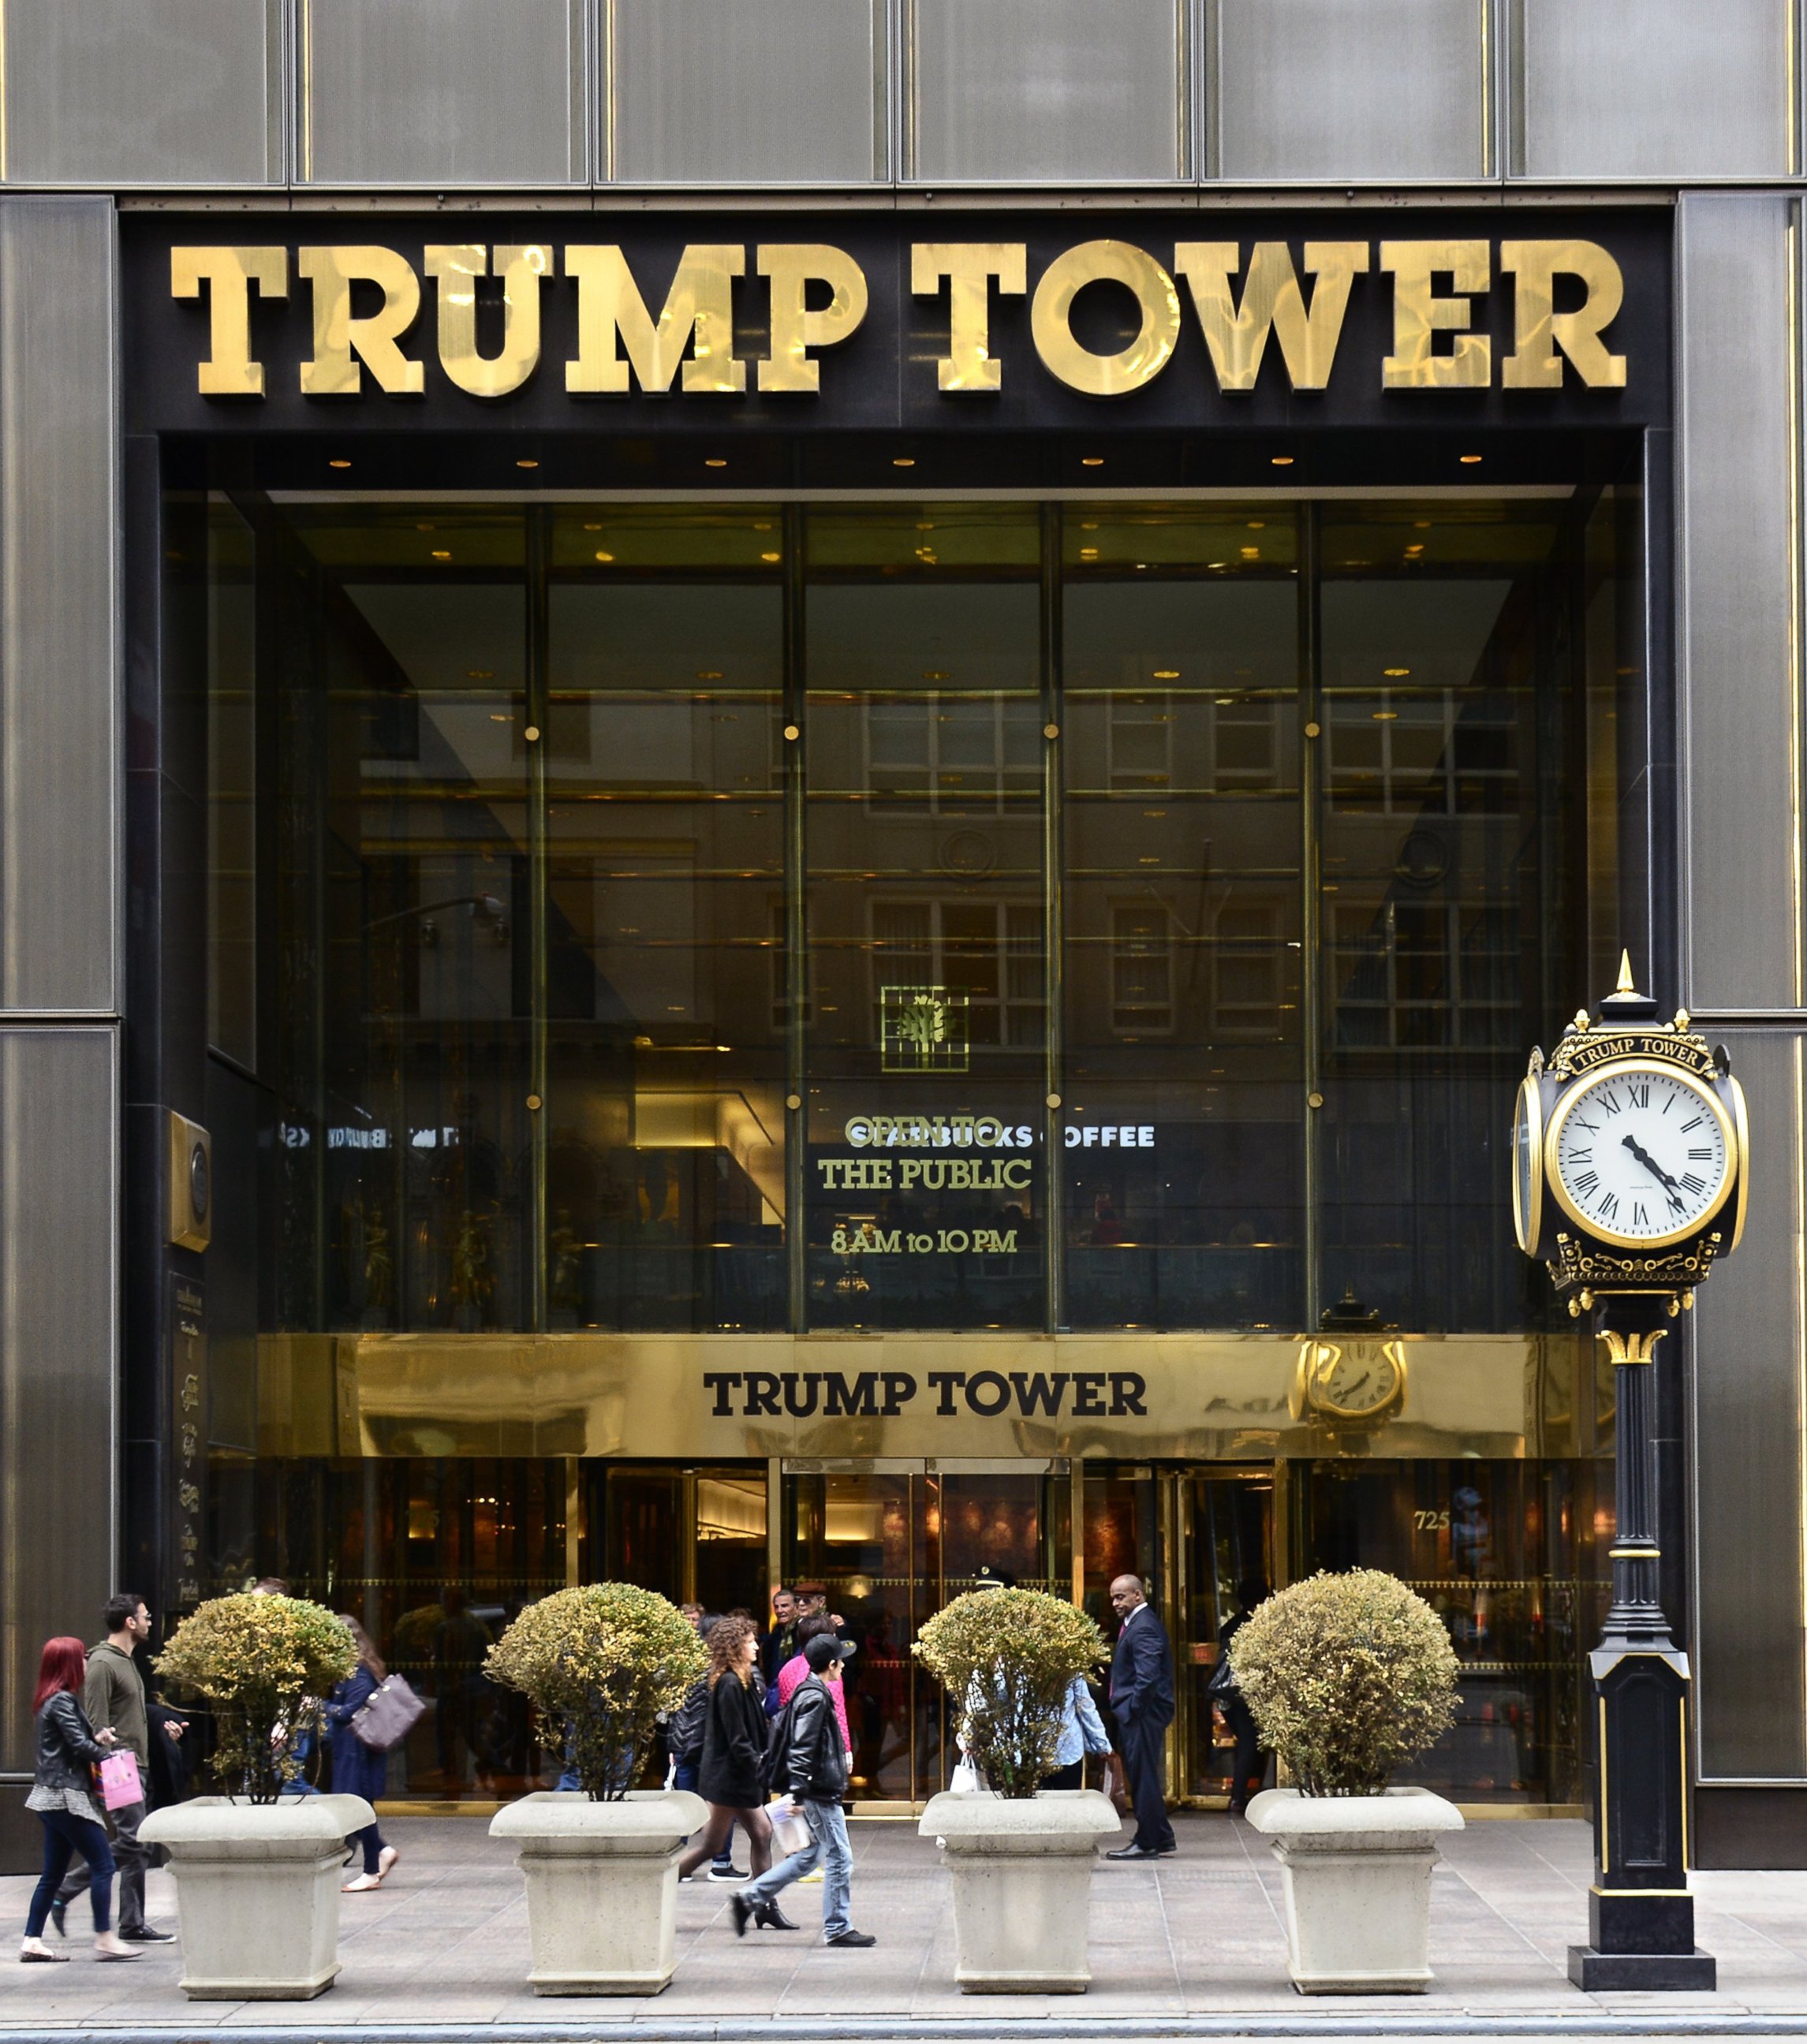 PHOTO: New York City shoppers and visitors walk past the entrance to Trump Tower on Fifth Avenue, a mixed use skyscraper owned by Donald Trump.